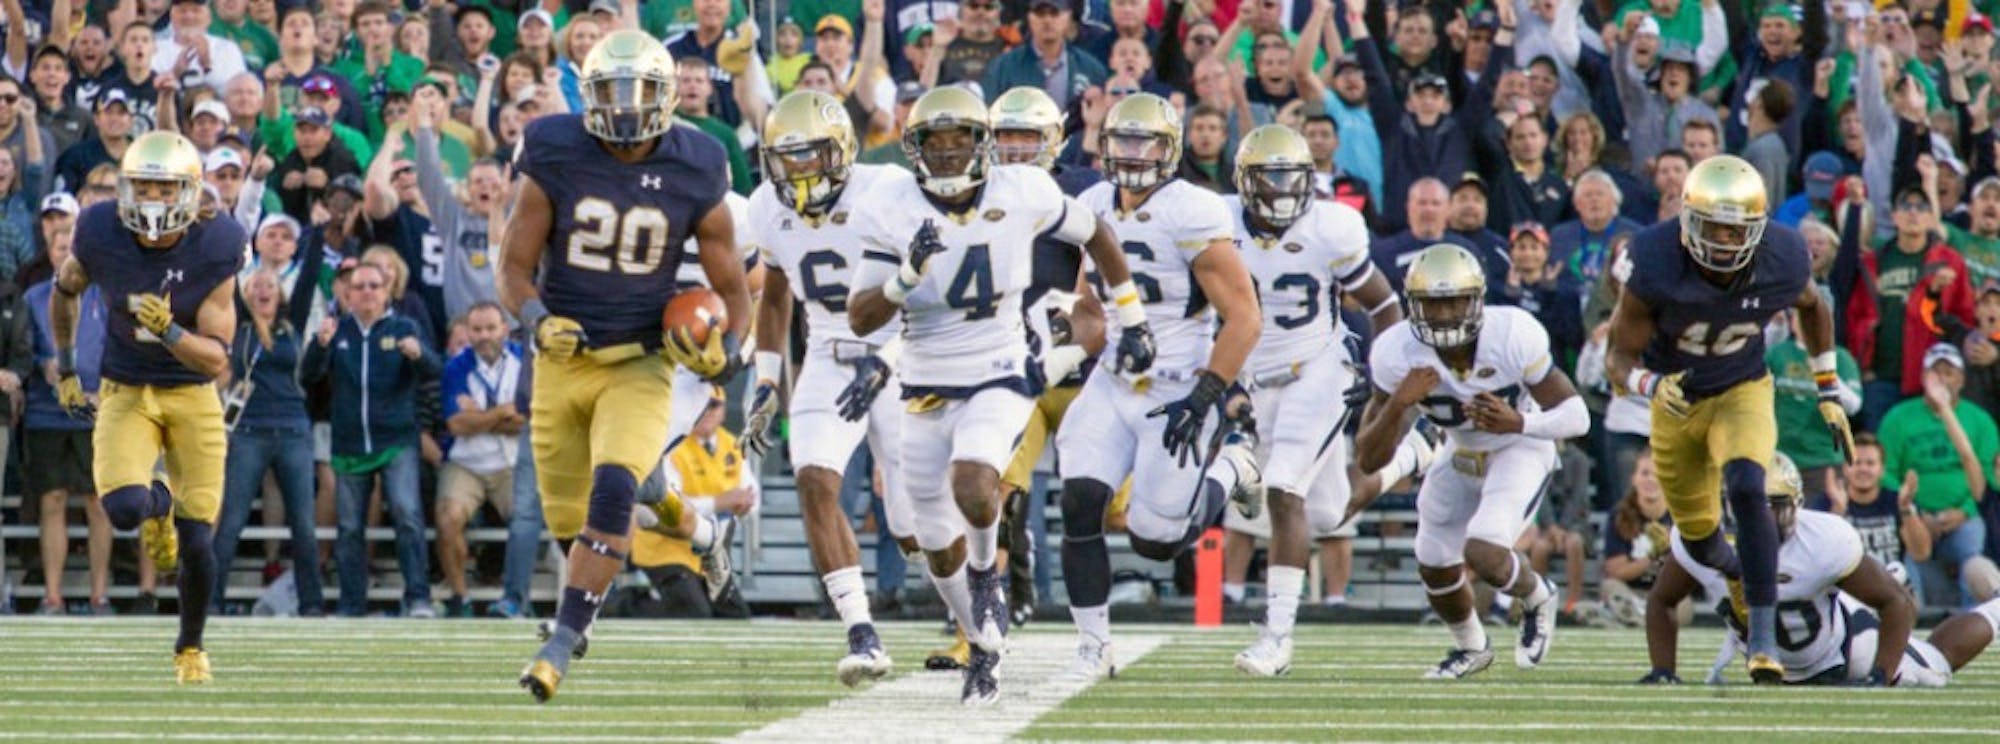 Irish senior running back C.J. Prosise sprints for a 91-yard touchdown run, leaving the Georgia Tech defense in his wake during Notre Dame’s 30-22 victory on Sept. 19 at Notre Dame Stadium.